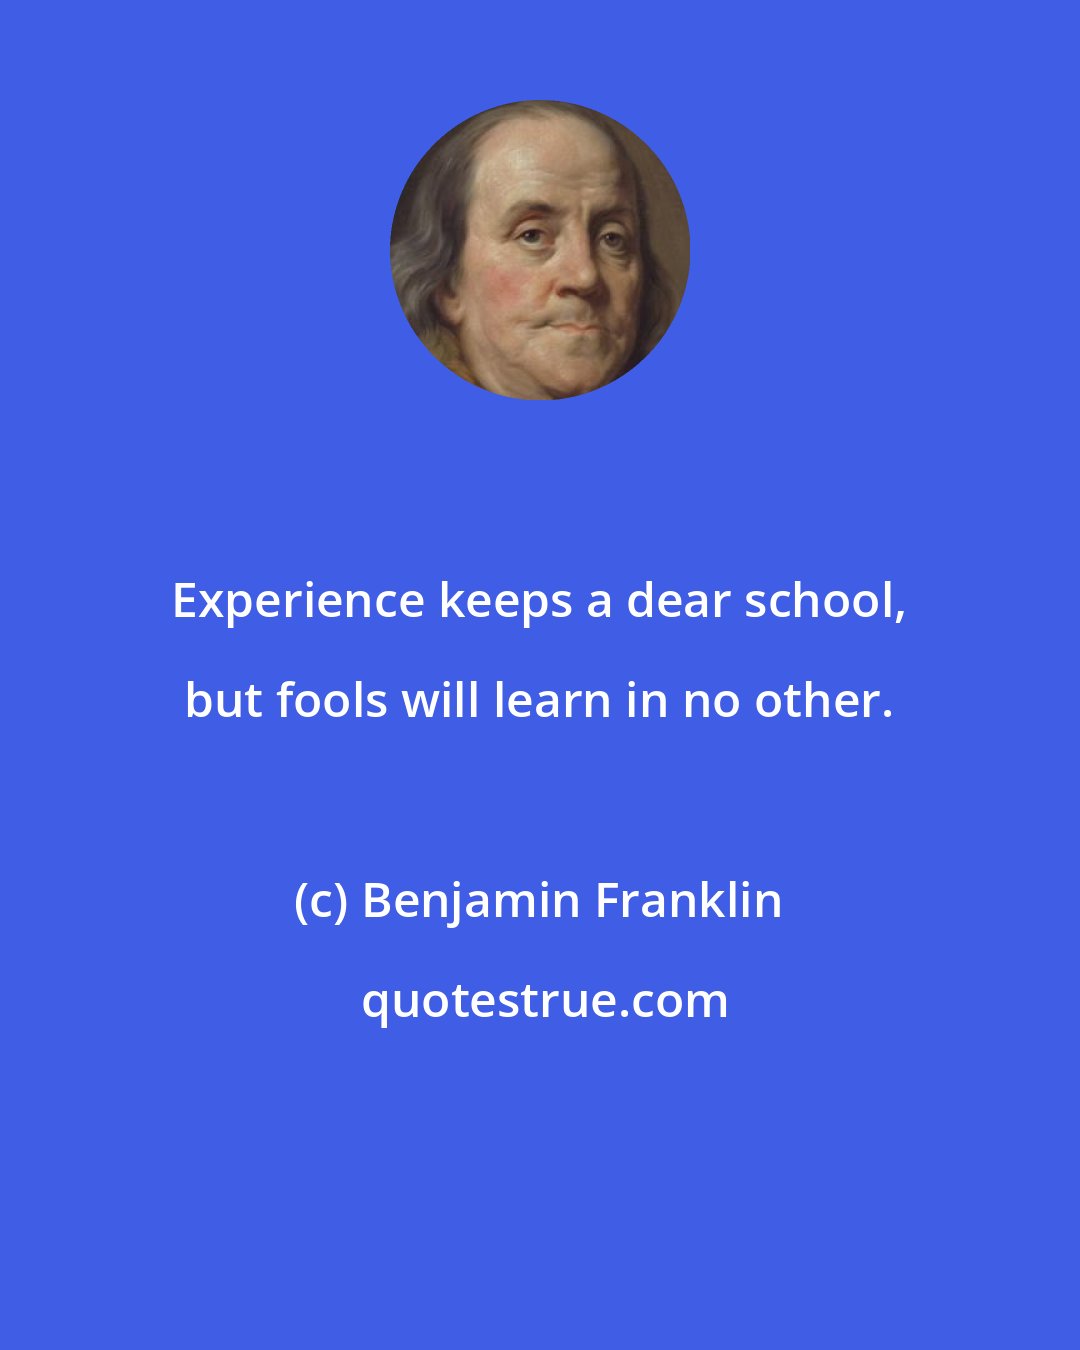 Benjamin Franklin: Experience keeps a dear school, but fools will learn in no other.